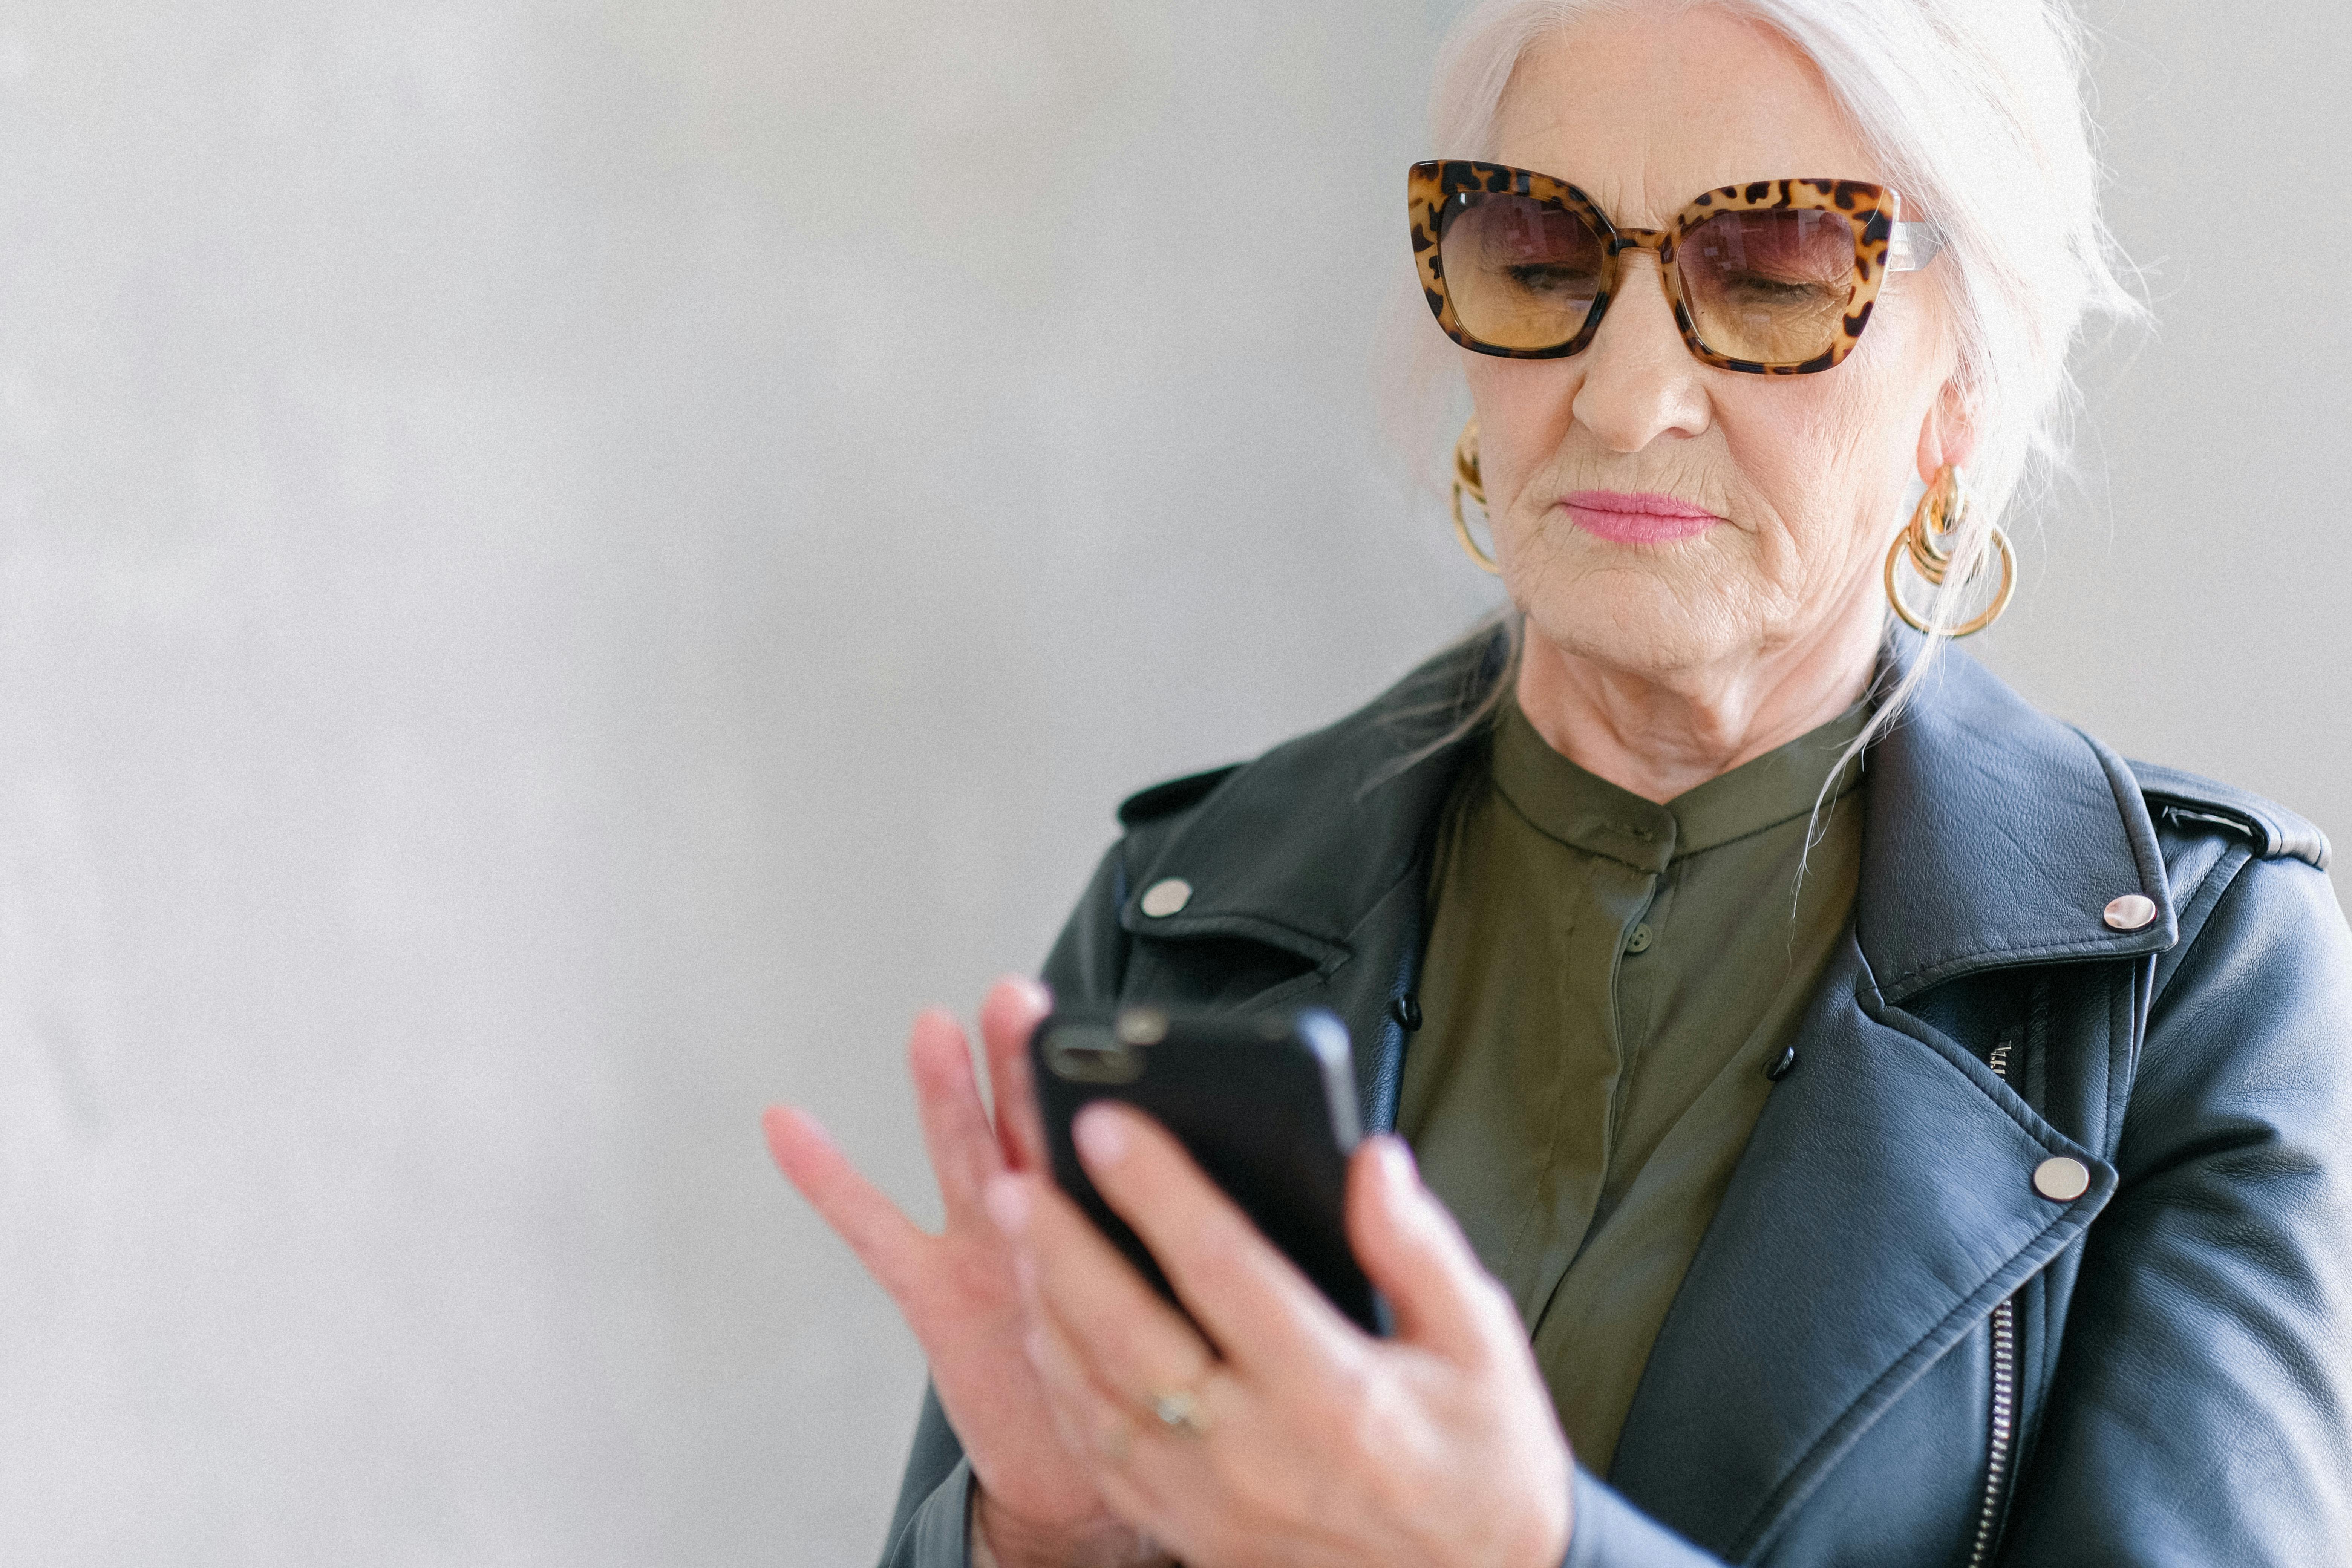 Unhappy-looking woman looking at her phone | Source: Pexels